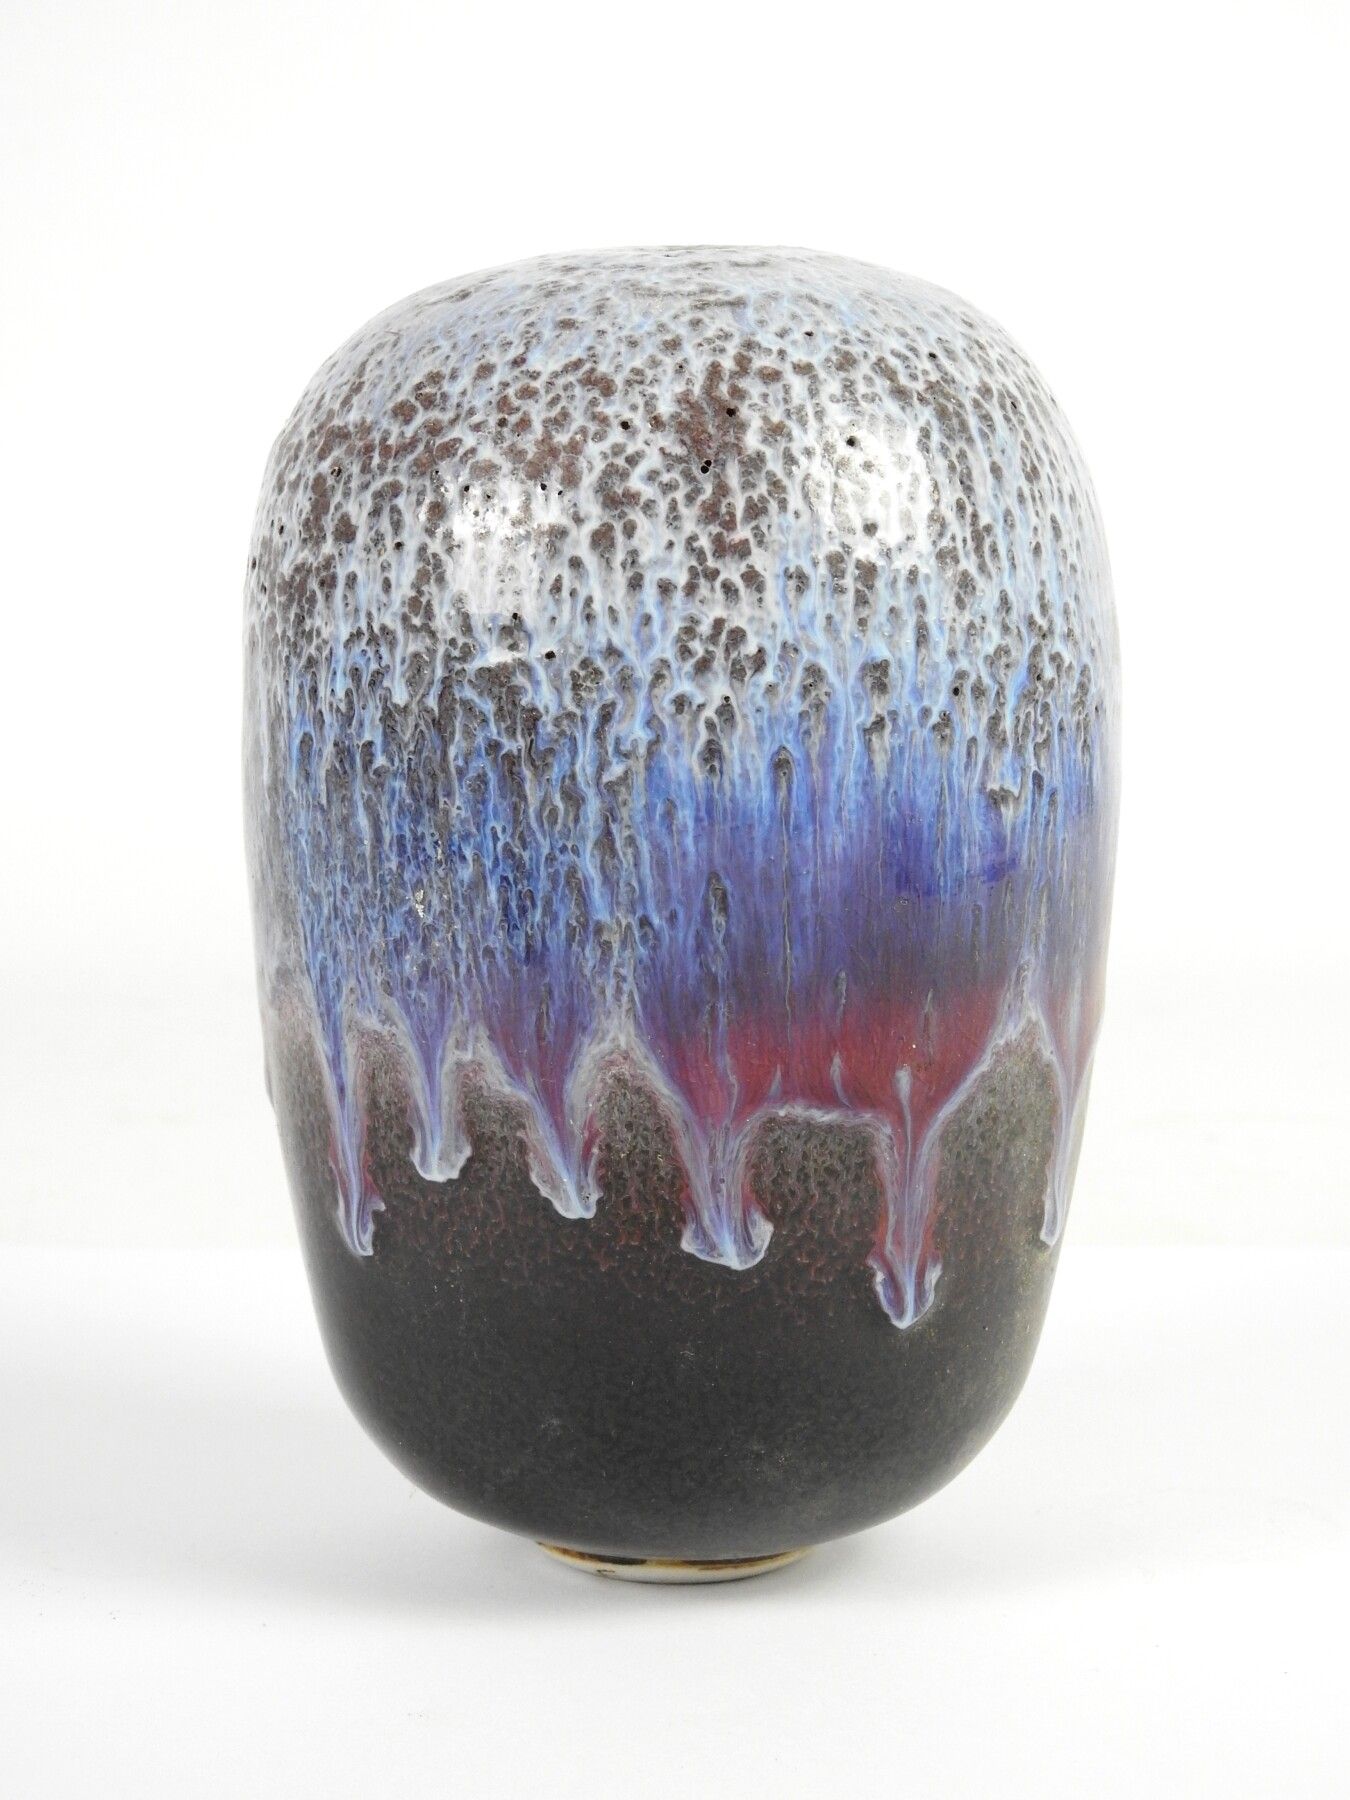 Null Jean-François FOUILHOUX (born in 1947) : Vase "shell" in blue violet and bl&hellip;